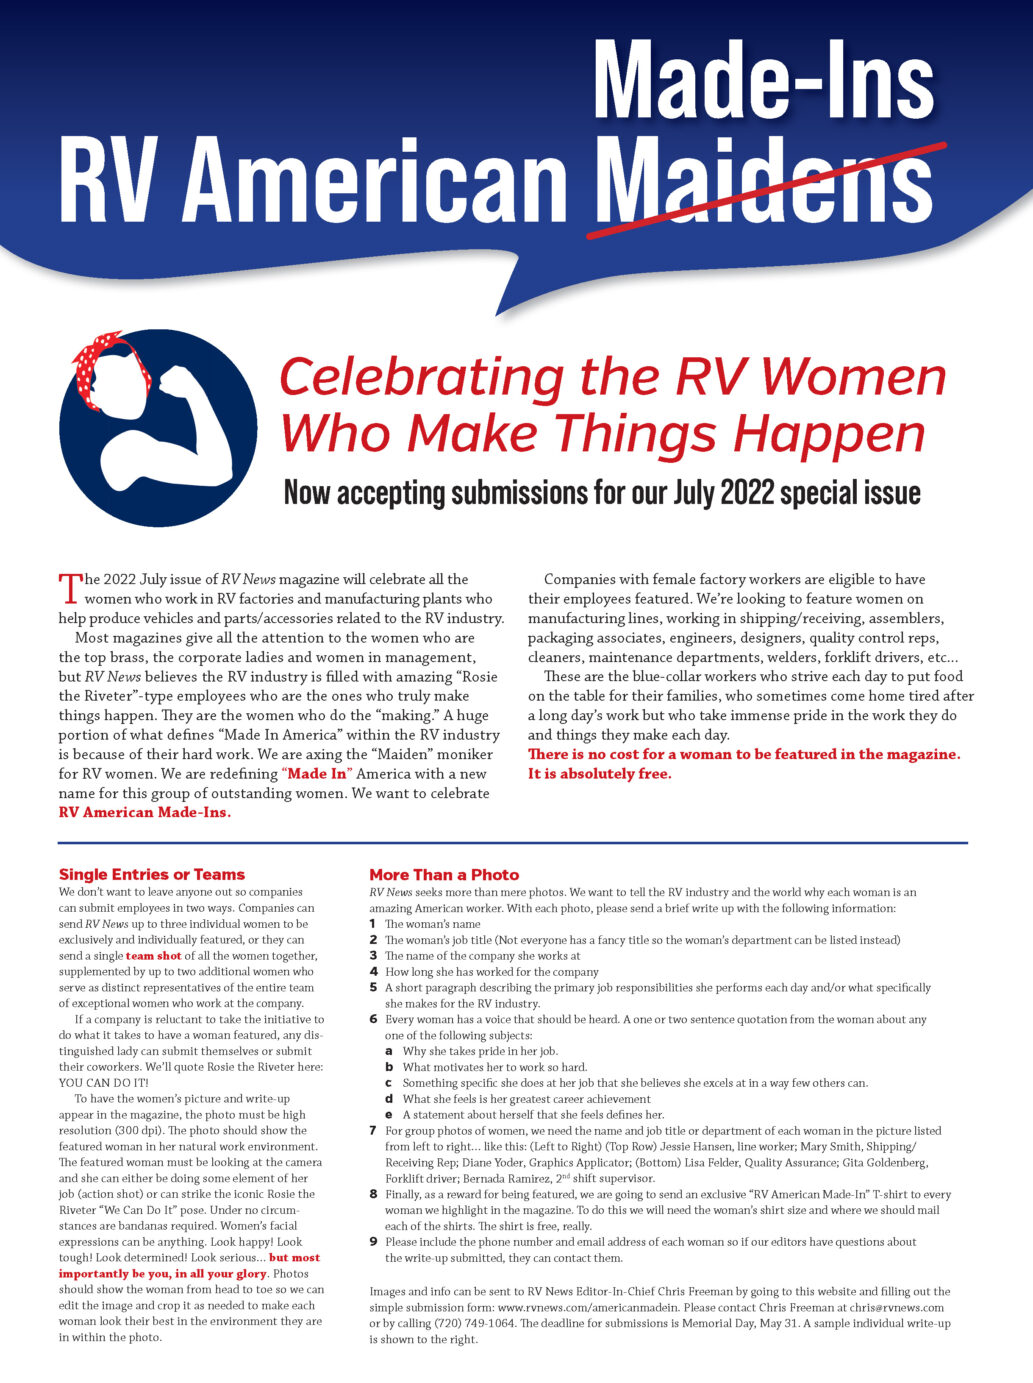 PPicture of RV American Made-Ins explanation Text